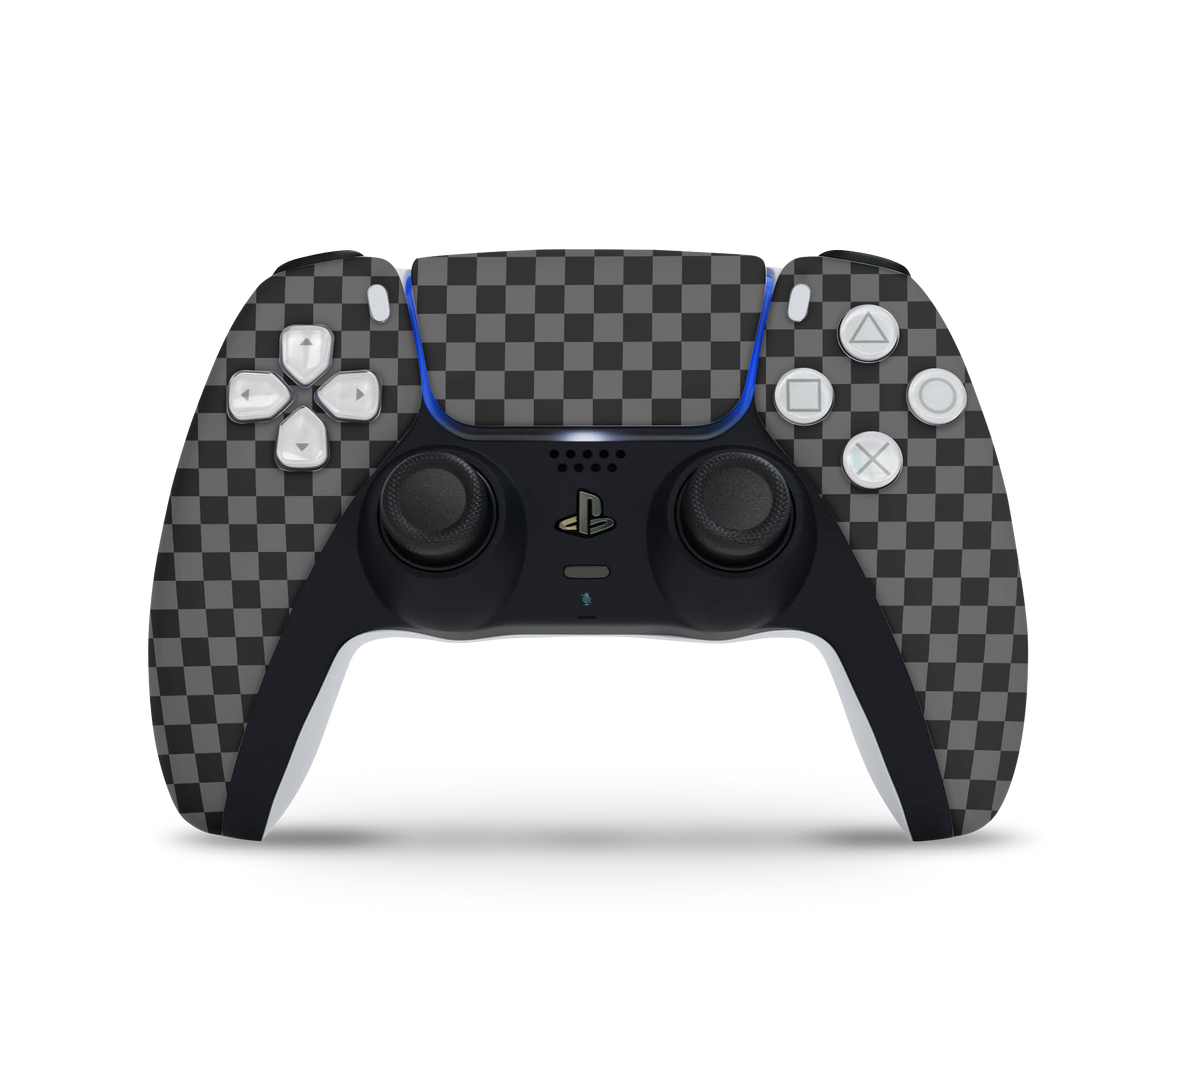 Playstation 5 Controller Checkers black